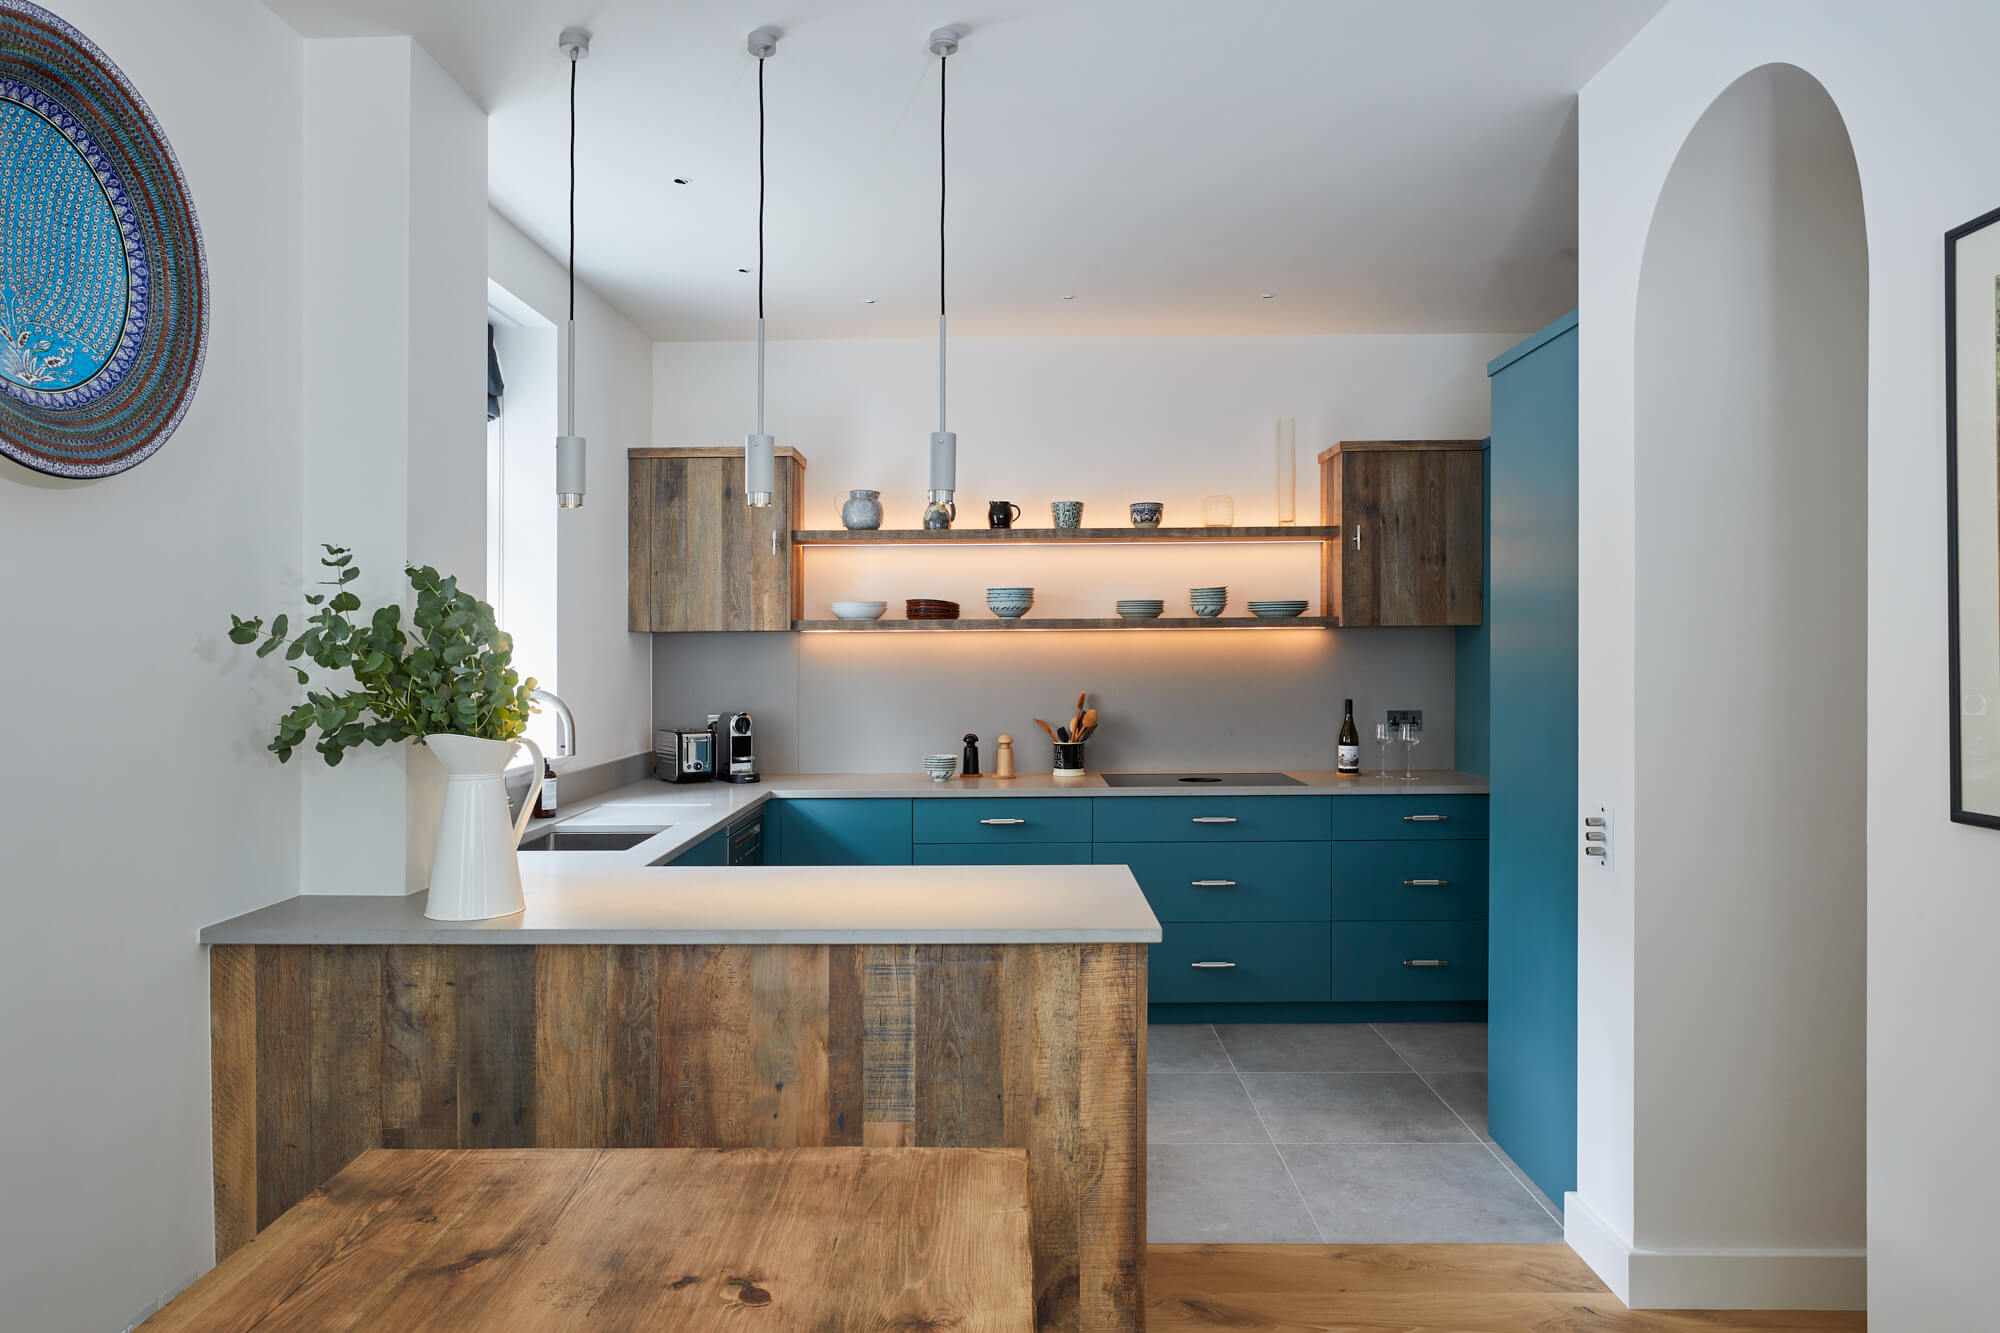 Reclaimed oak and teal blue kitchen by The Main Company - The